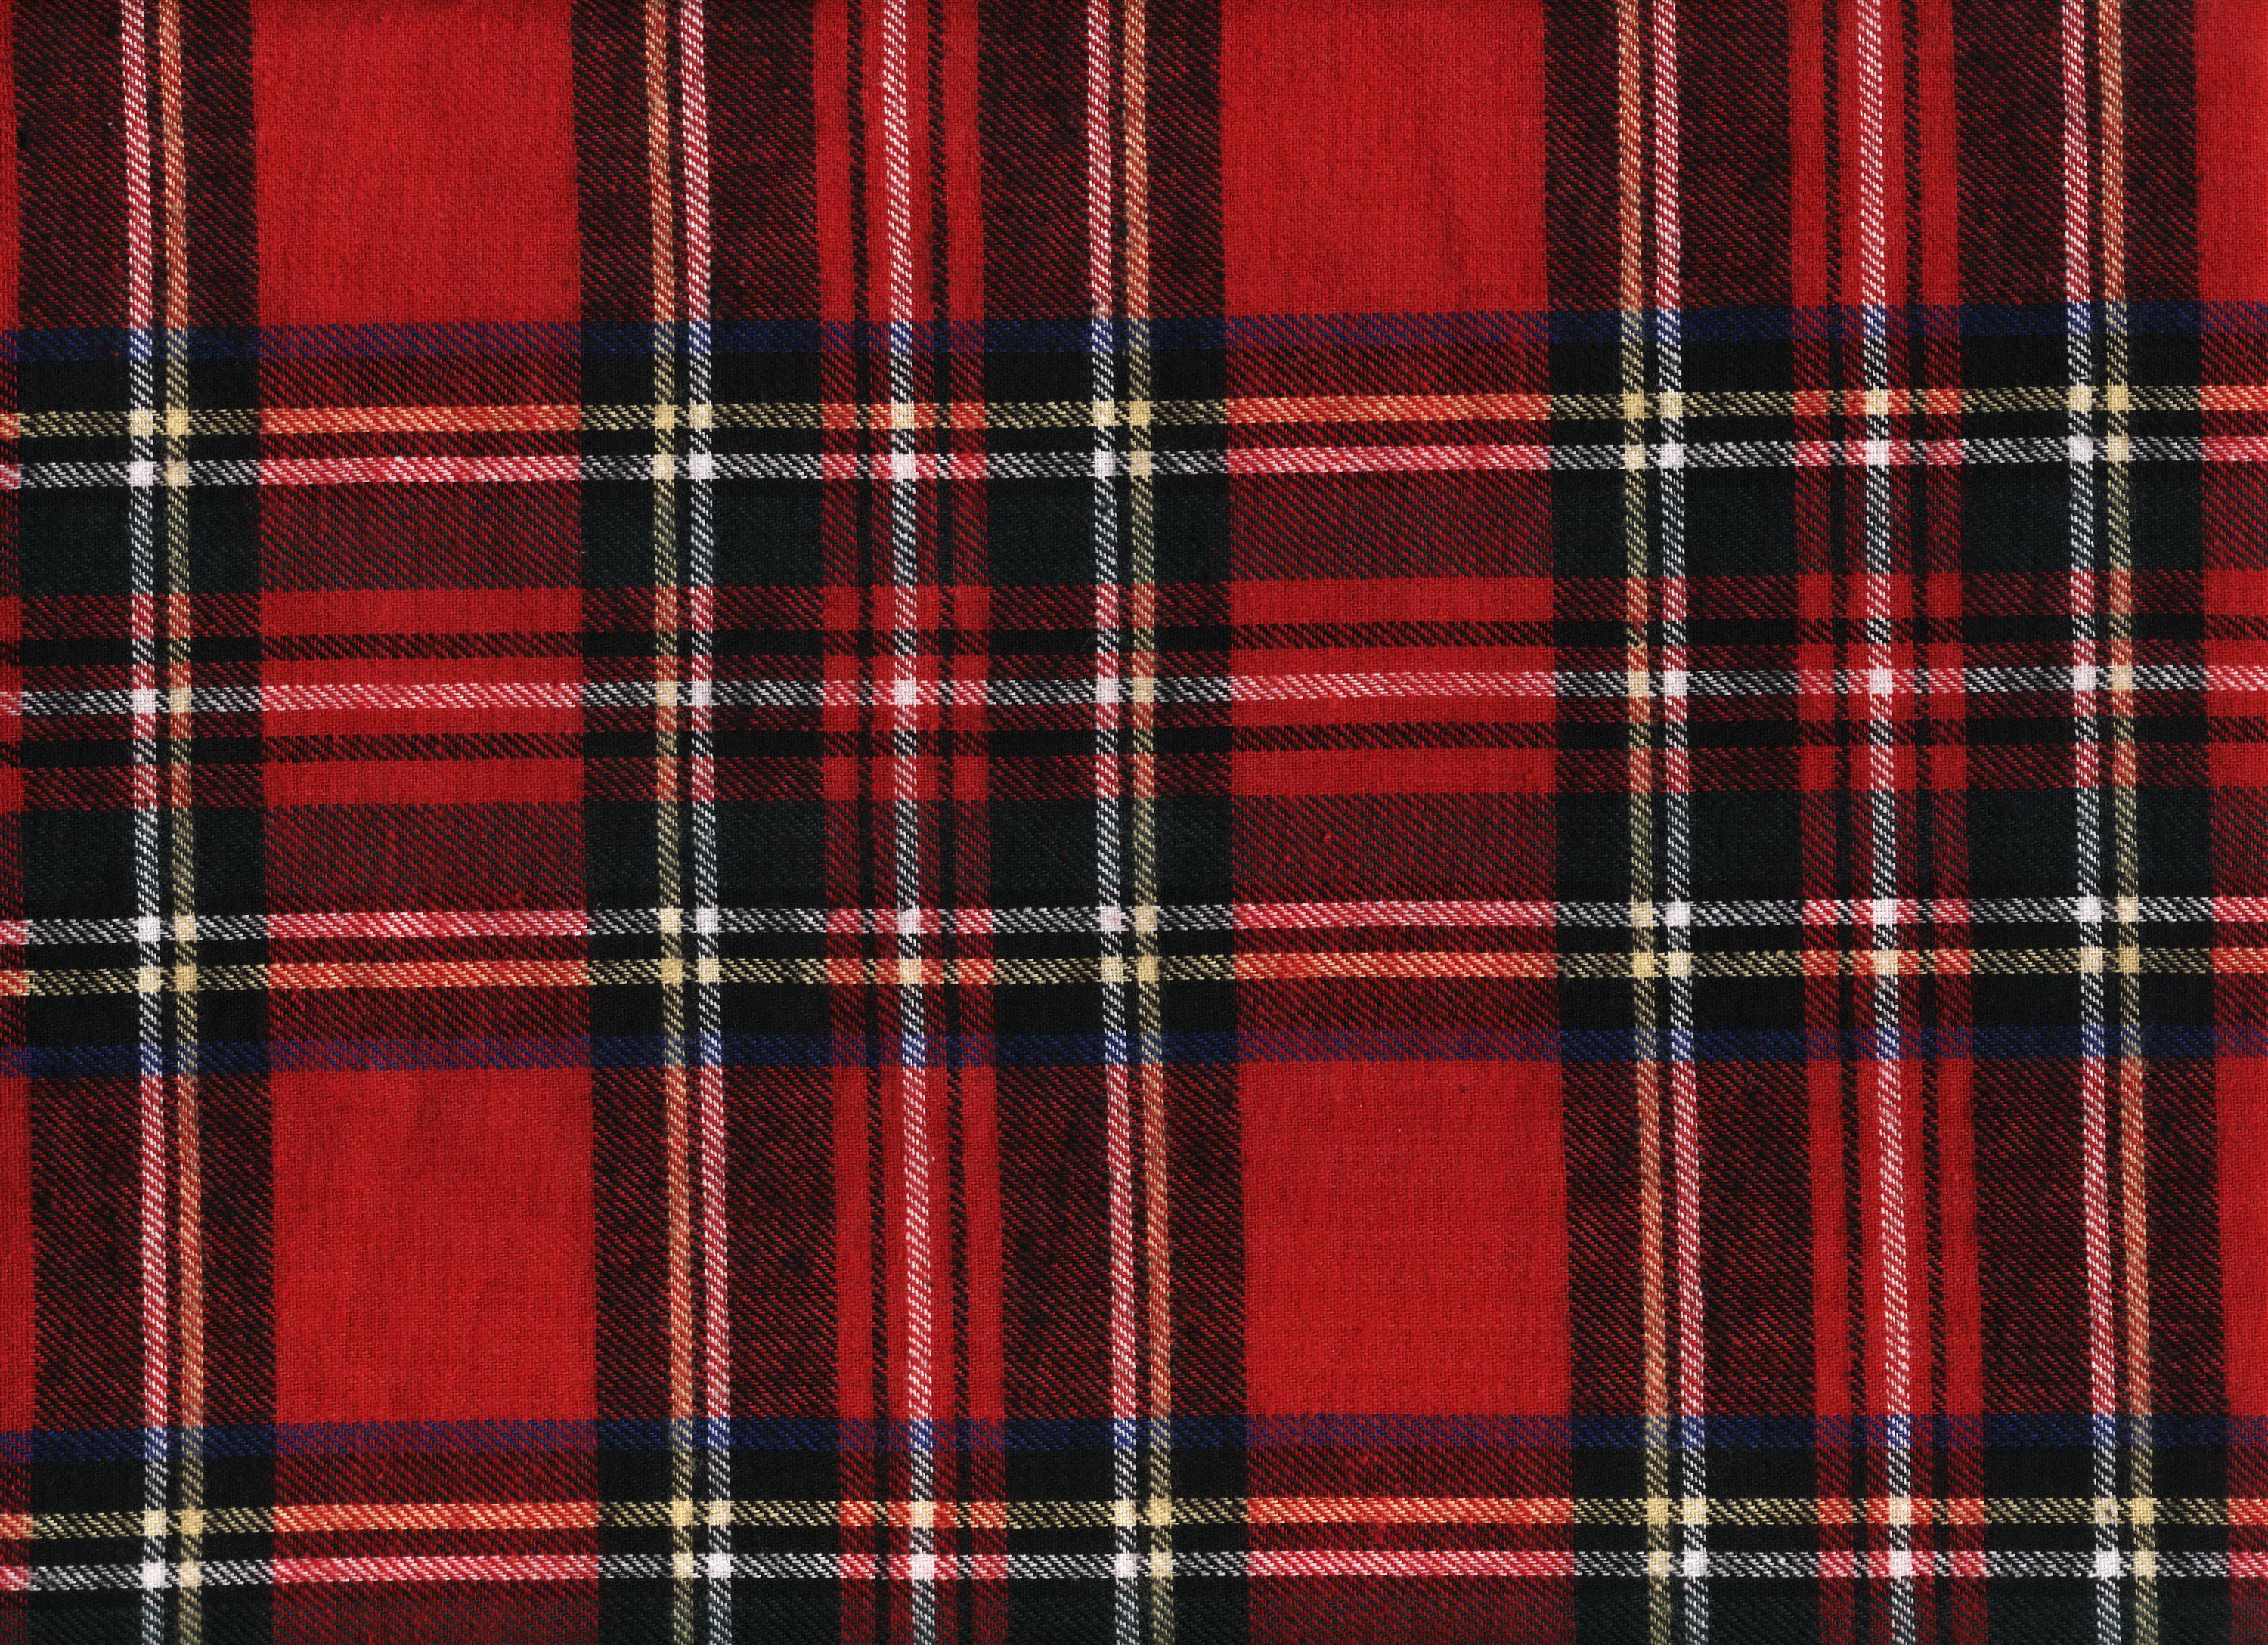 Flannel Full Hd Wallpaper And Background Image 3000x2176 HD Wallpapers Download Free Images Wallpaper [wallpaper981.blogspot.com]